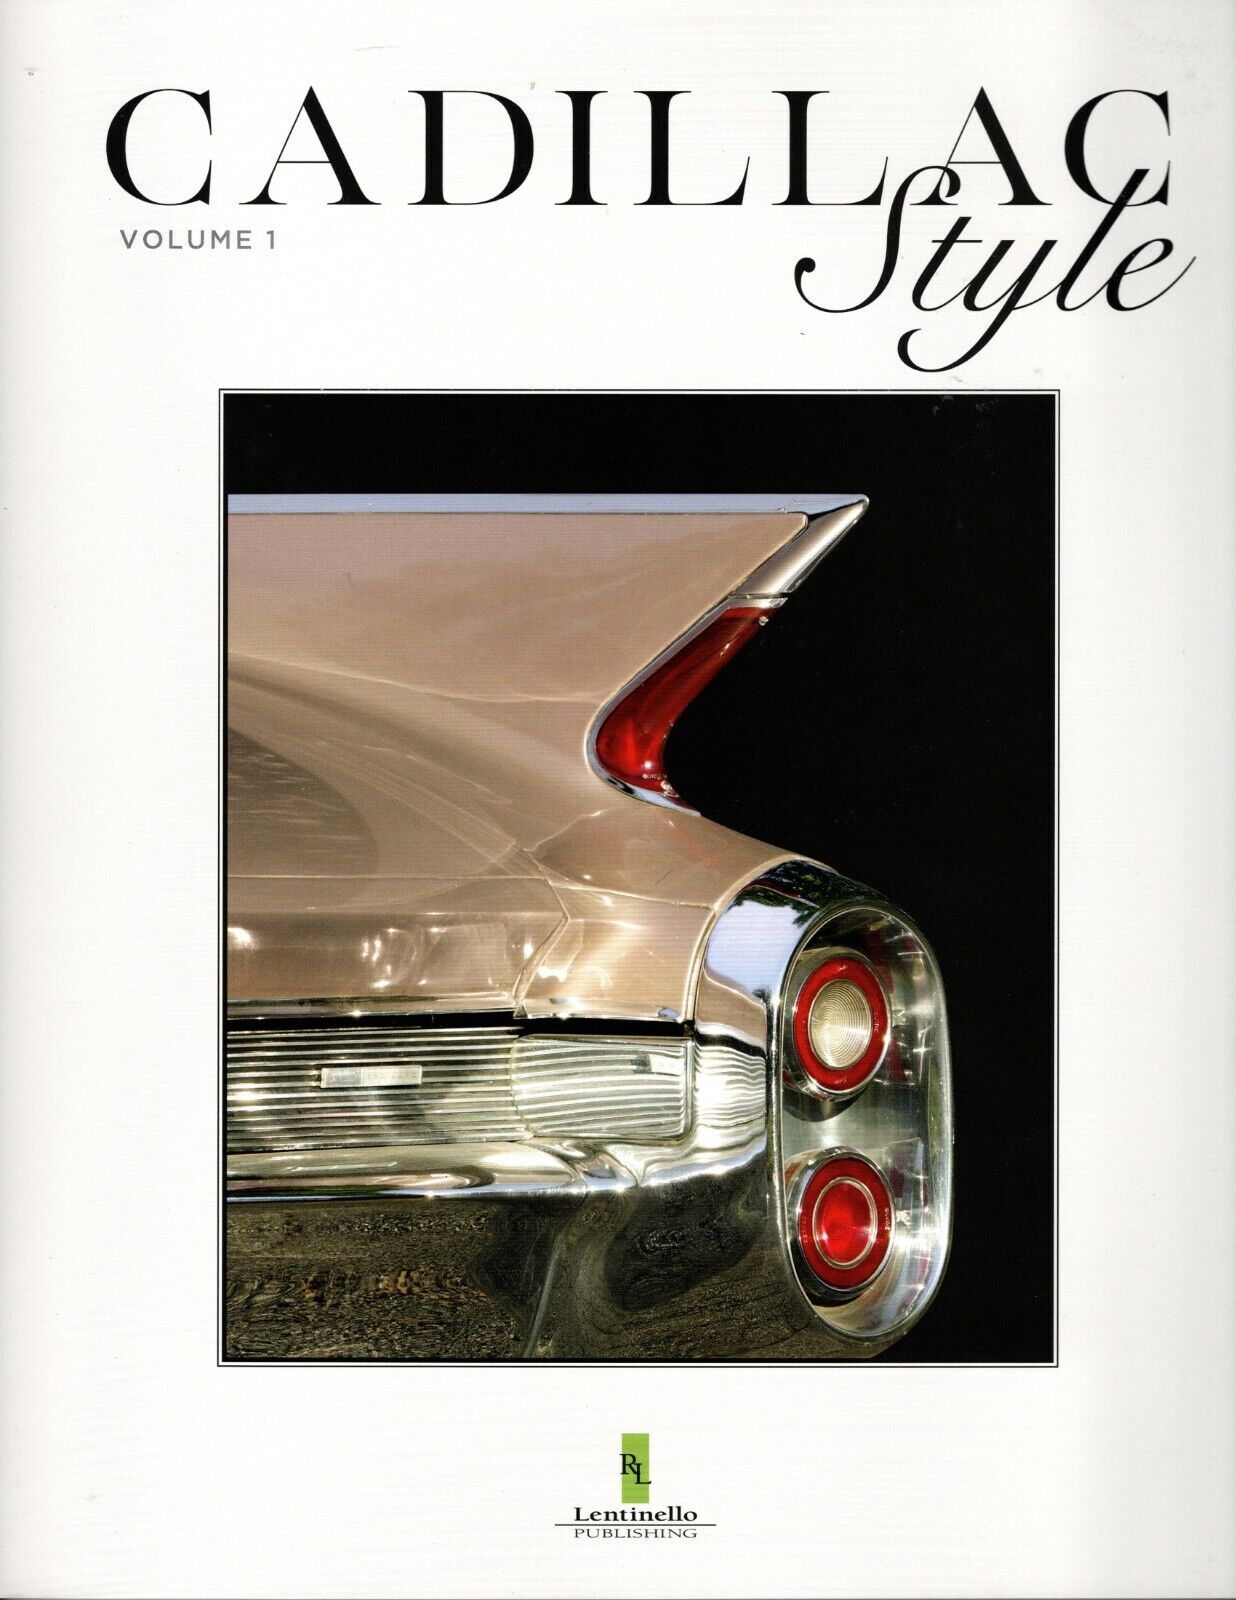 Cadillac Styling- by Richard Lentinello- GREAT NEW BOOK